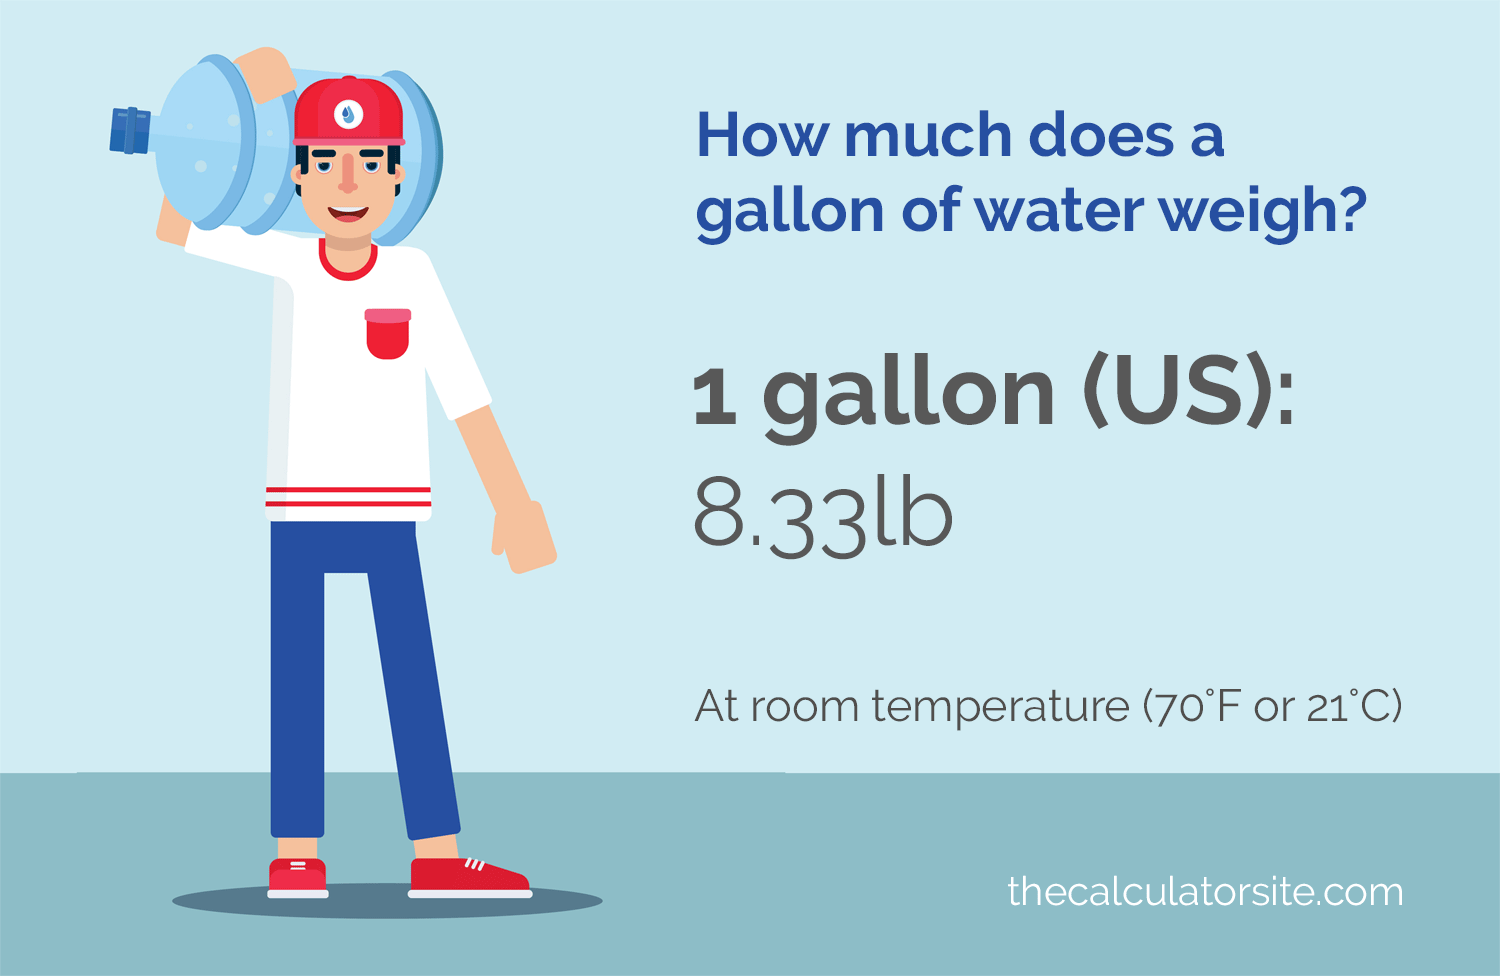 How Much Does a Gallon of Water Weigh?